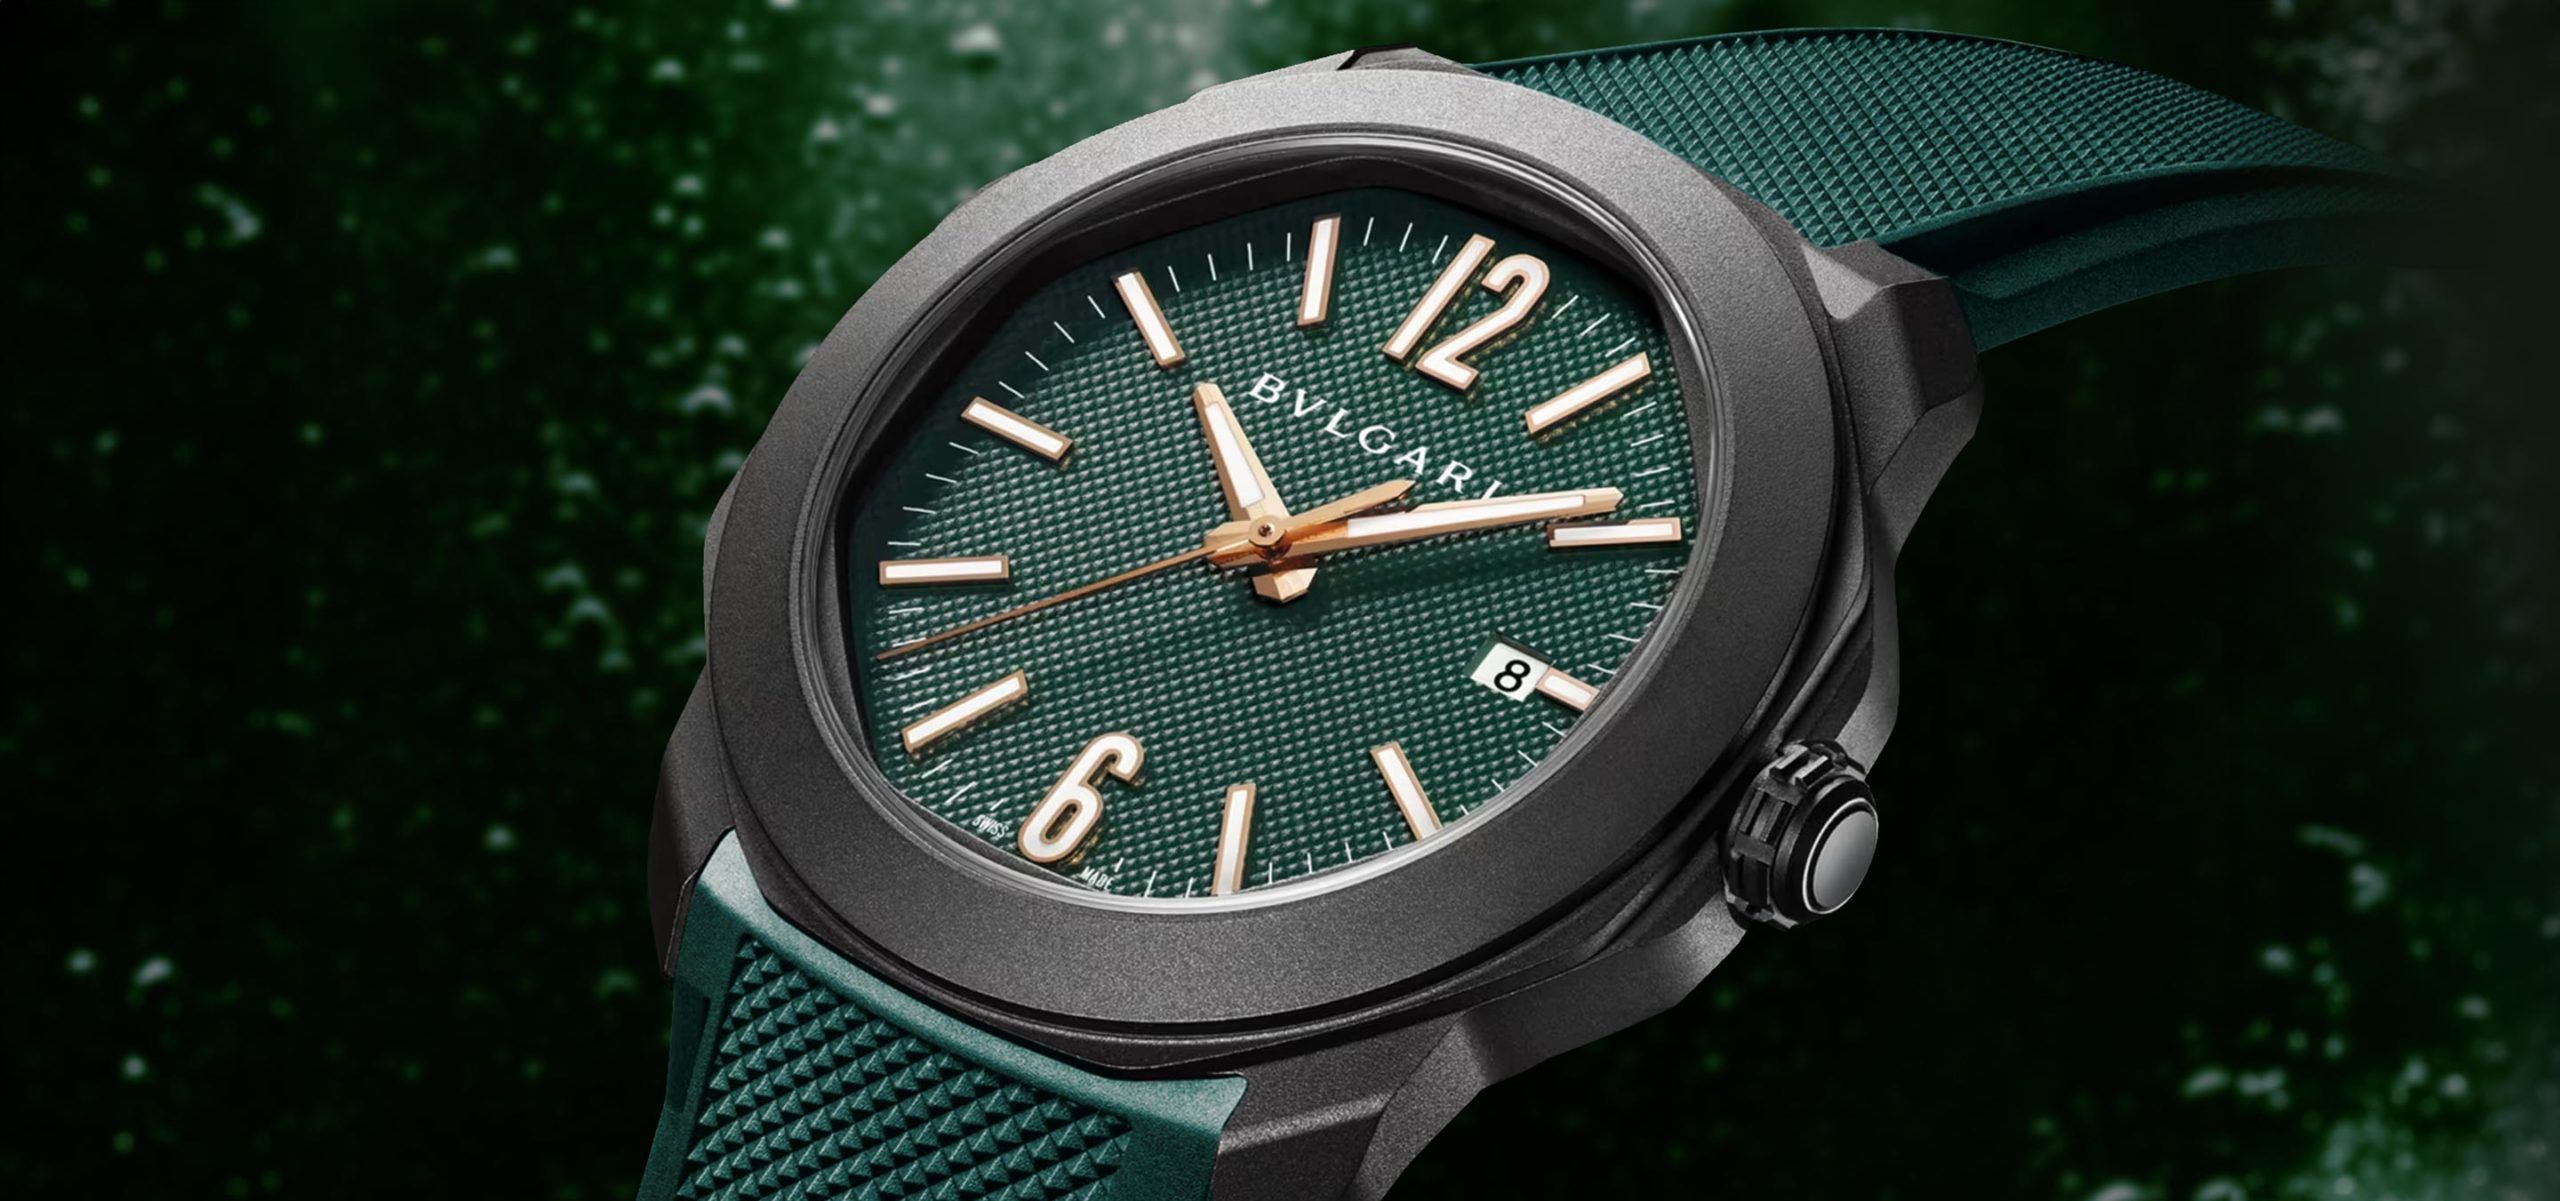 A Case For Sporty-Chic Sophistication: Presenting The Bulgari Octo Roma Special Edition